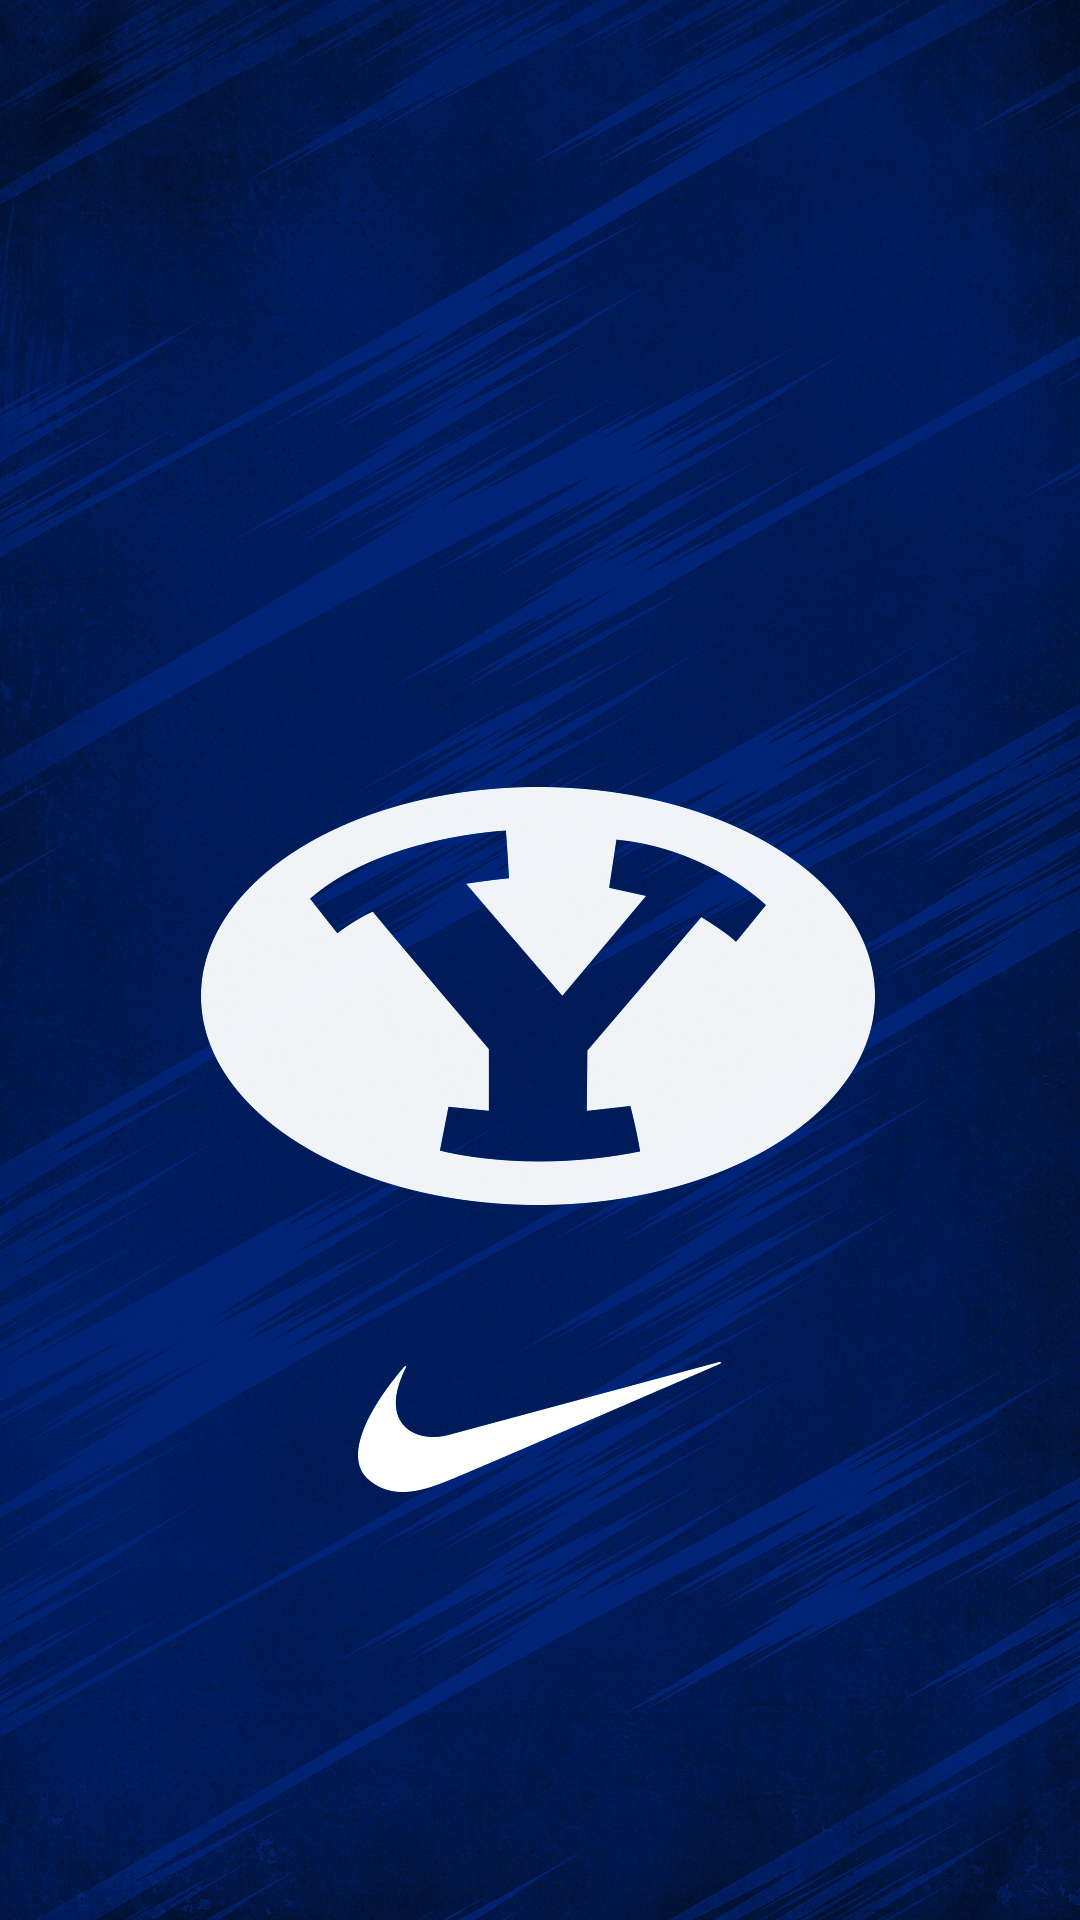 iPhone Wallpaper Byu On